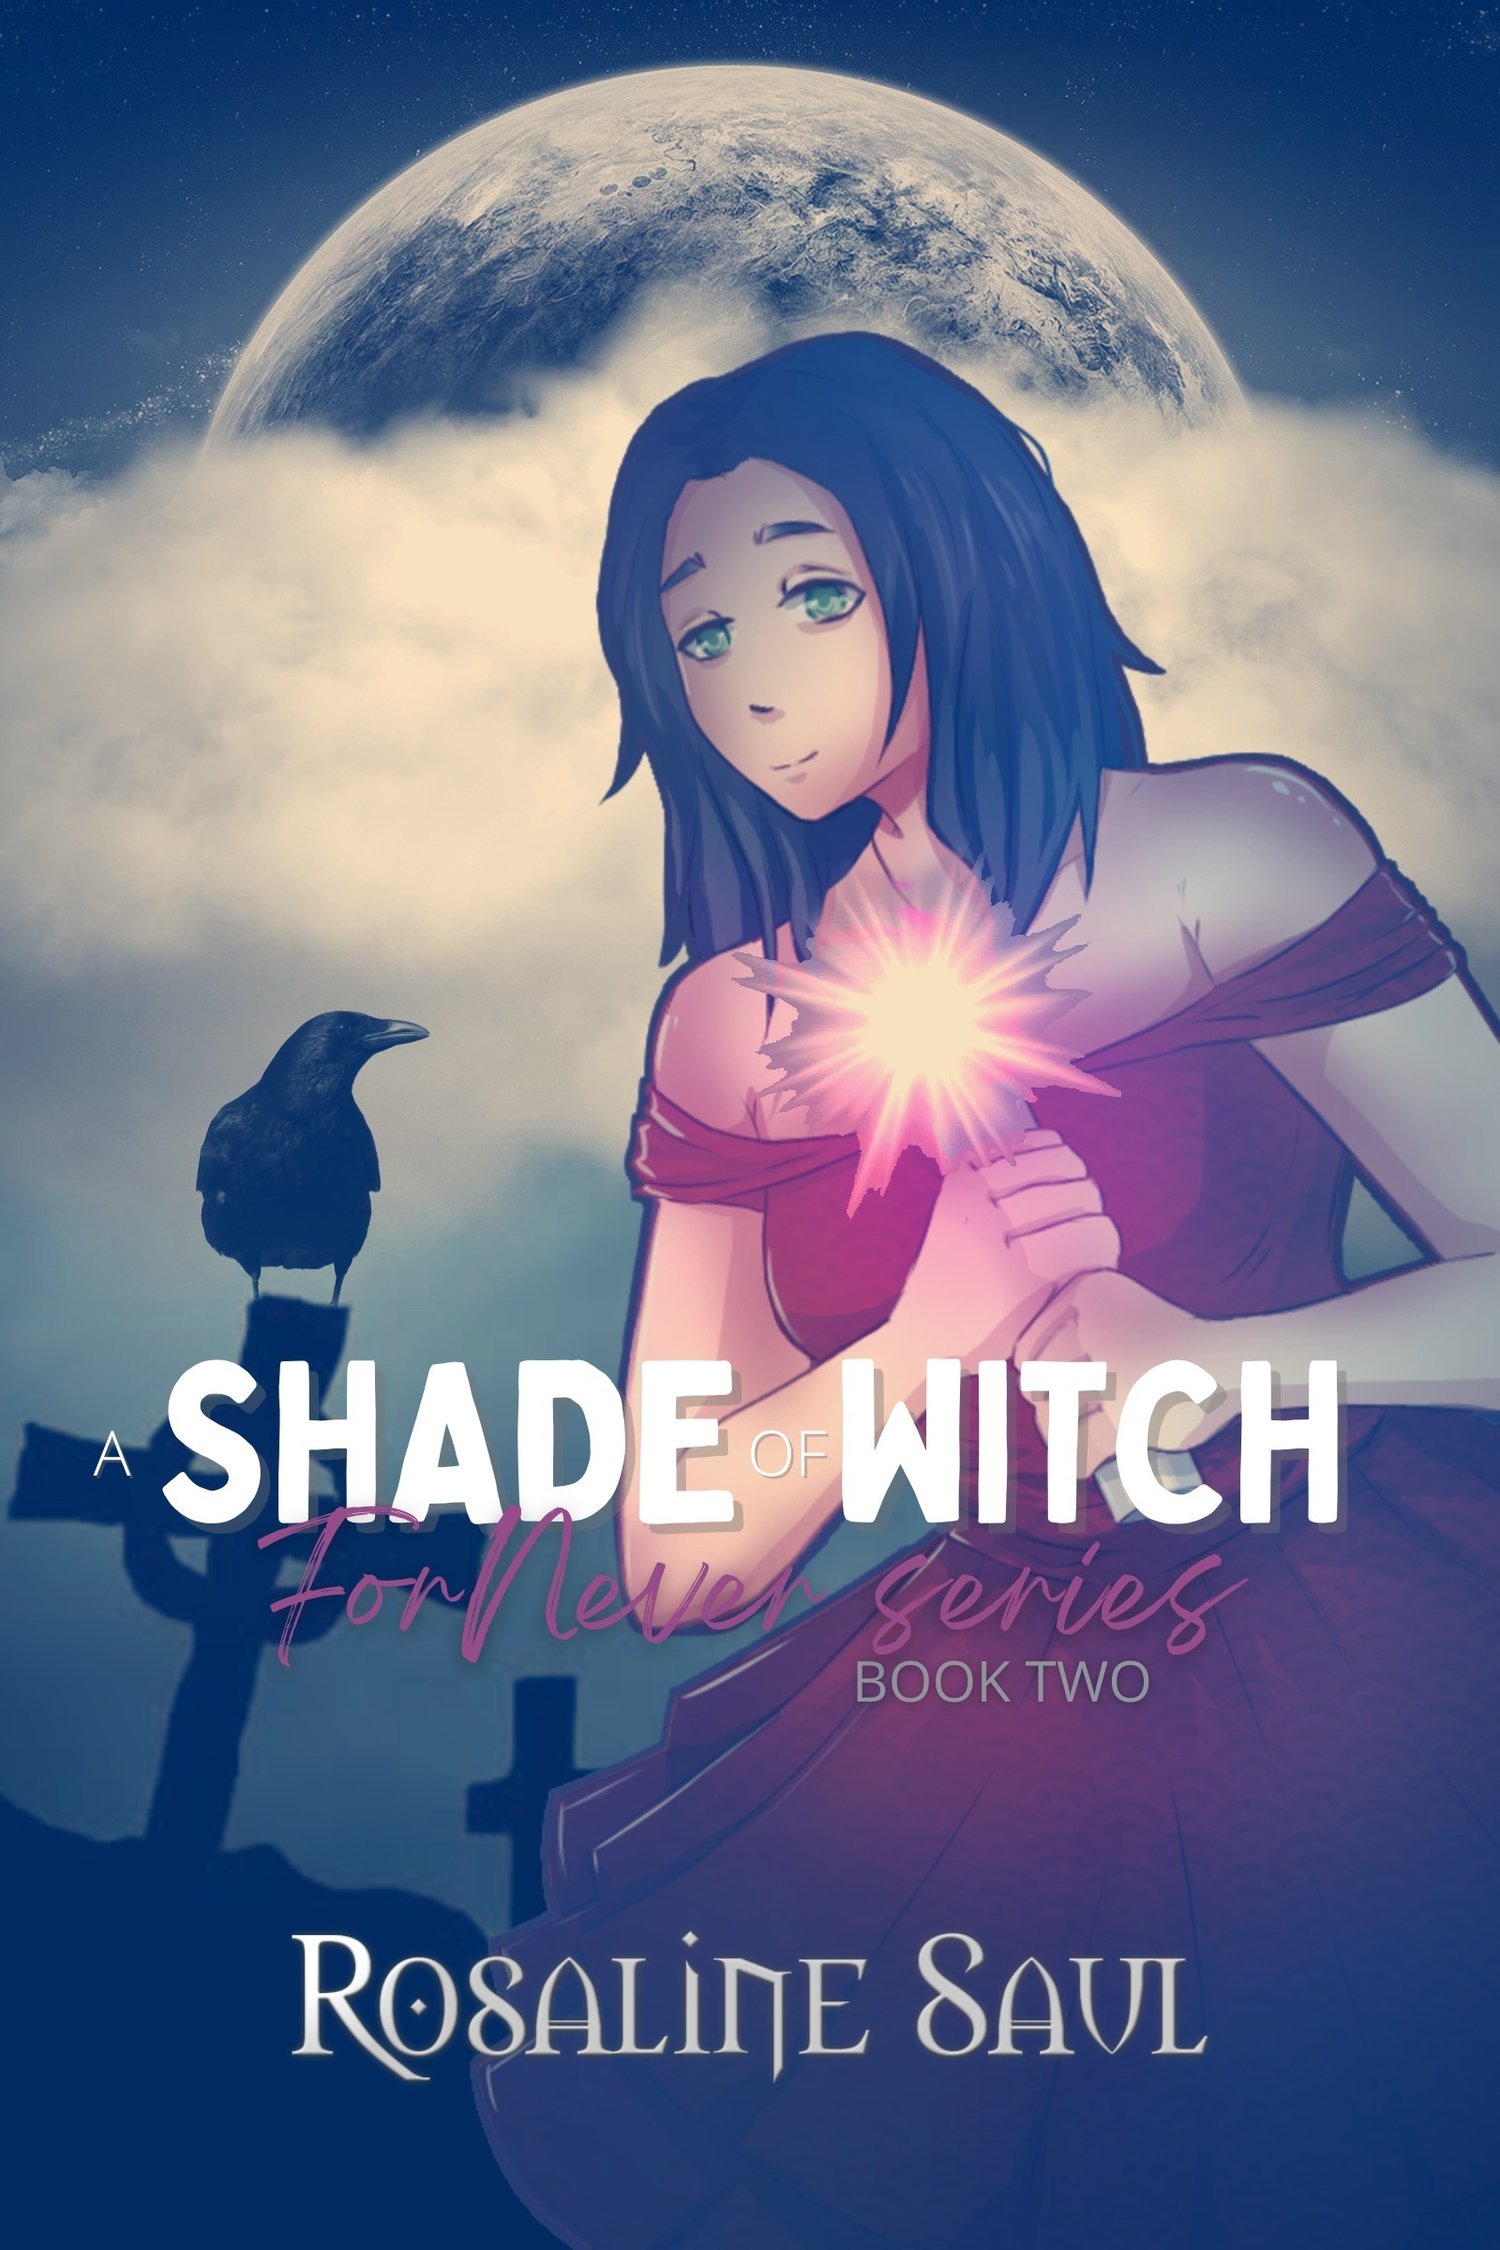 A Shade of Witch by Rosaline Saul